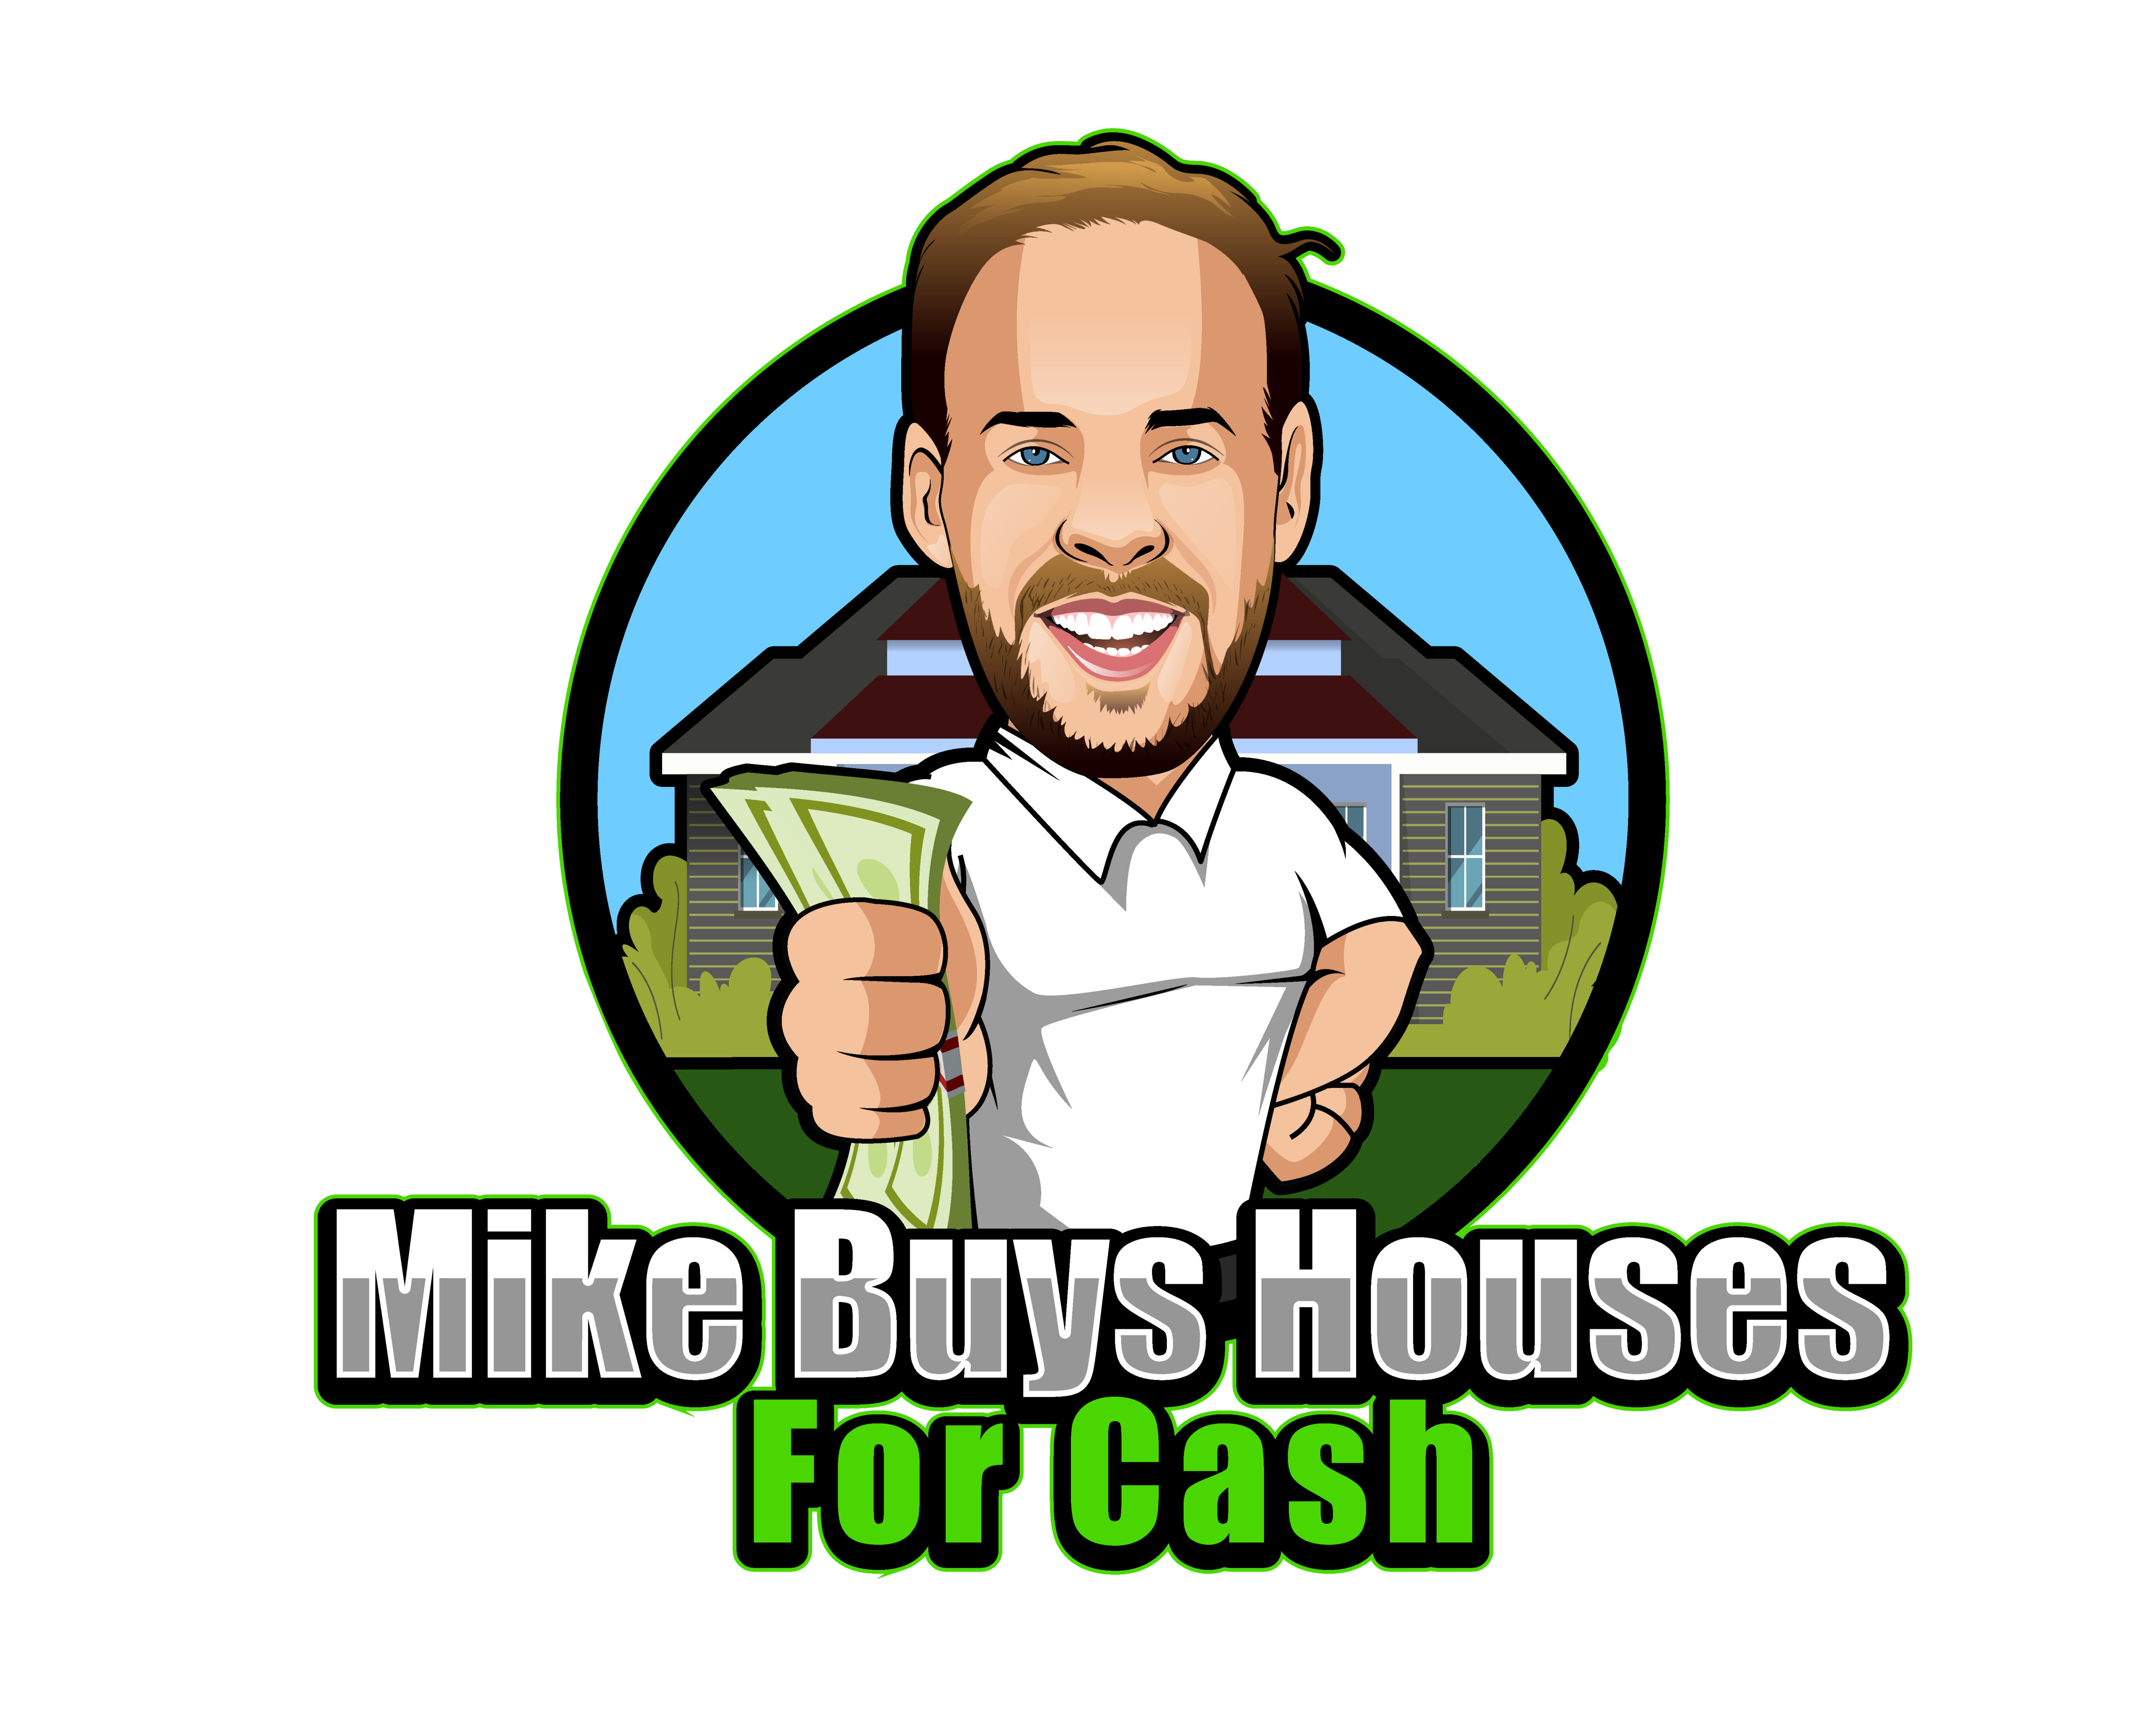 MikeBuys Houses For Cash logo